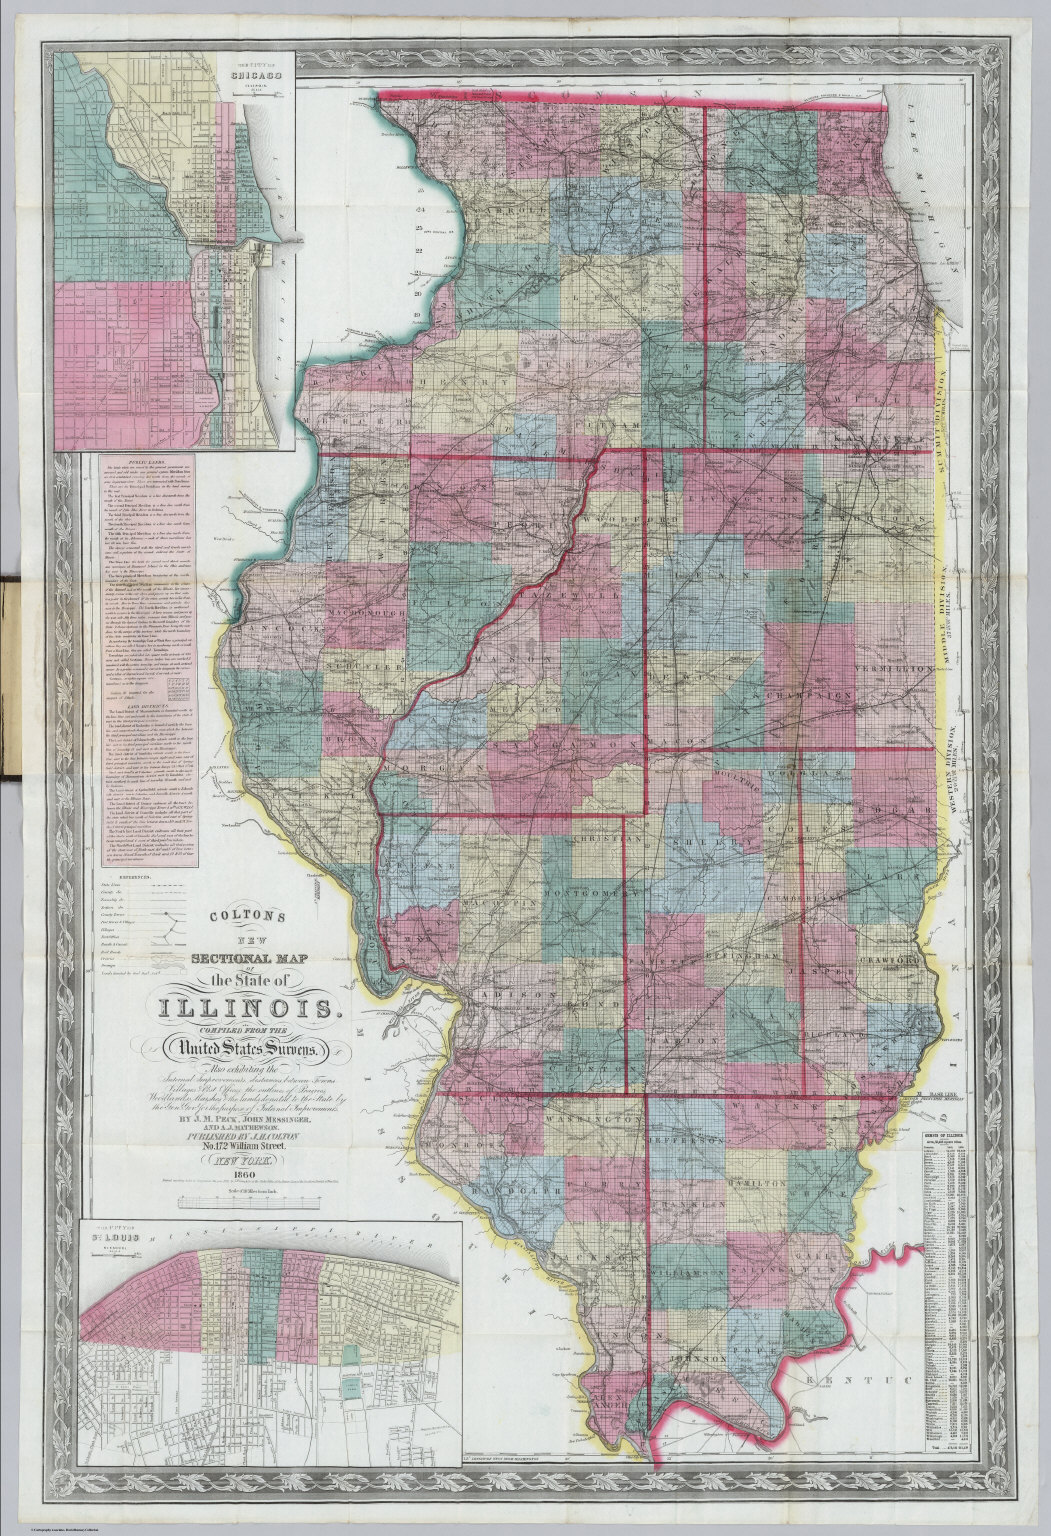 Sectional Map Of The State Of Illinois David Rumsey Historical Map Collection 9098